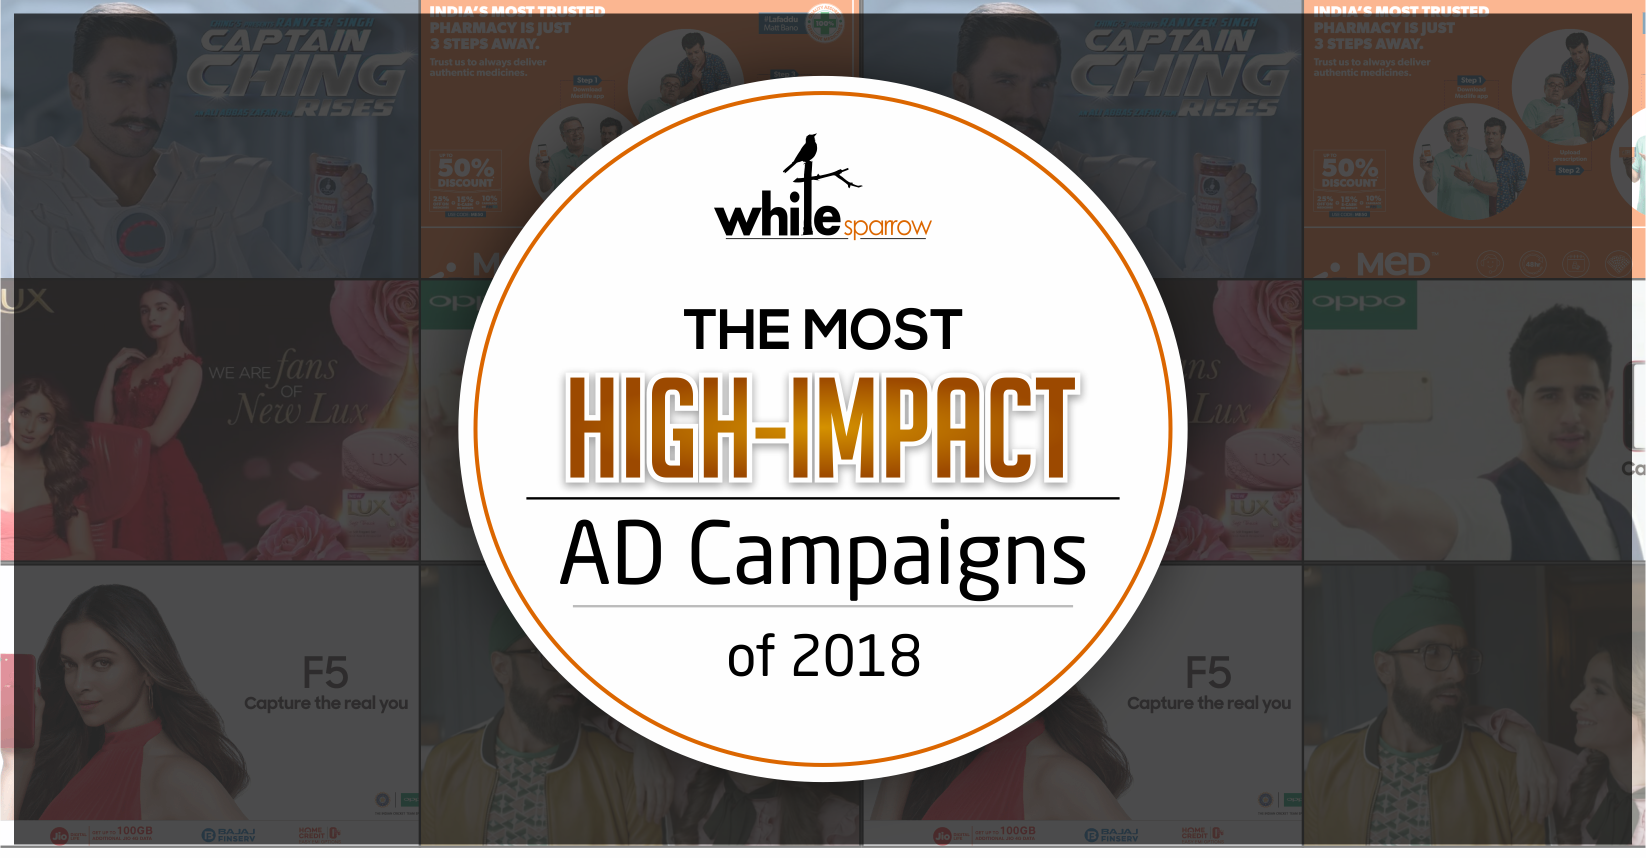 The most high-impact ad campaigns of 2018